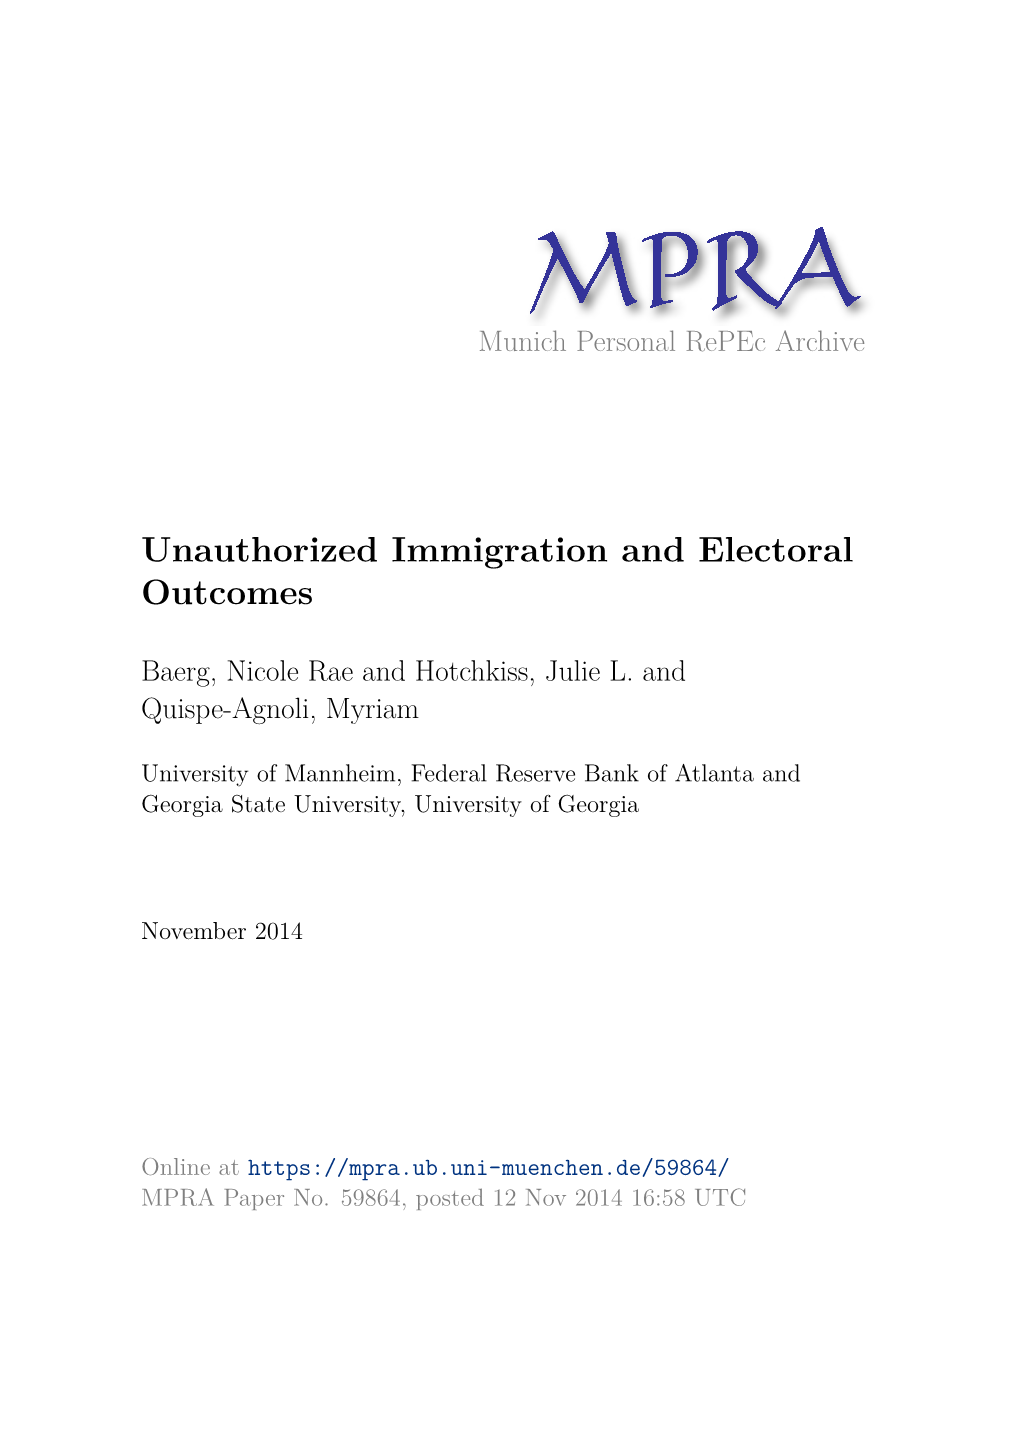 Unauthorized Immigration and Electoral Outcomes